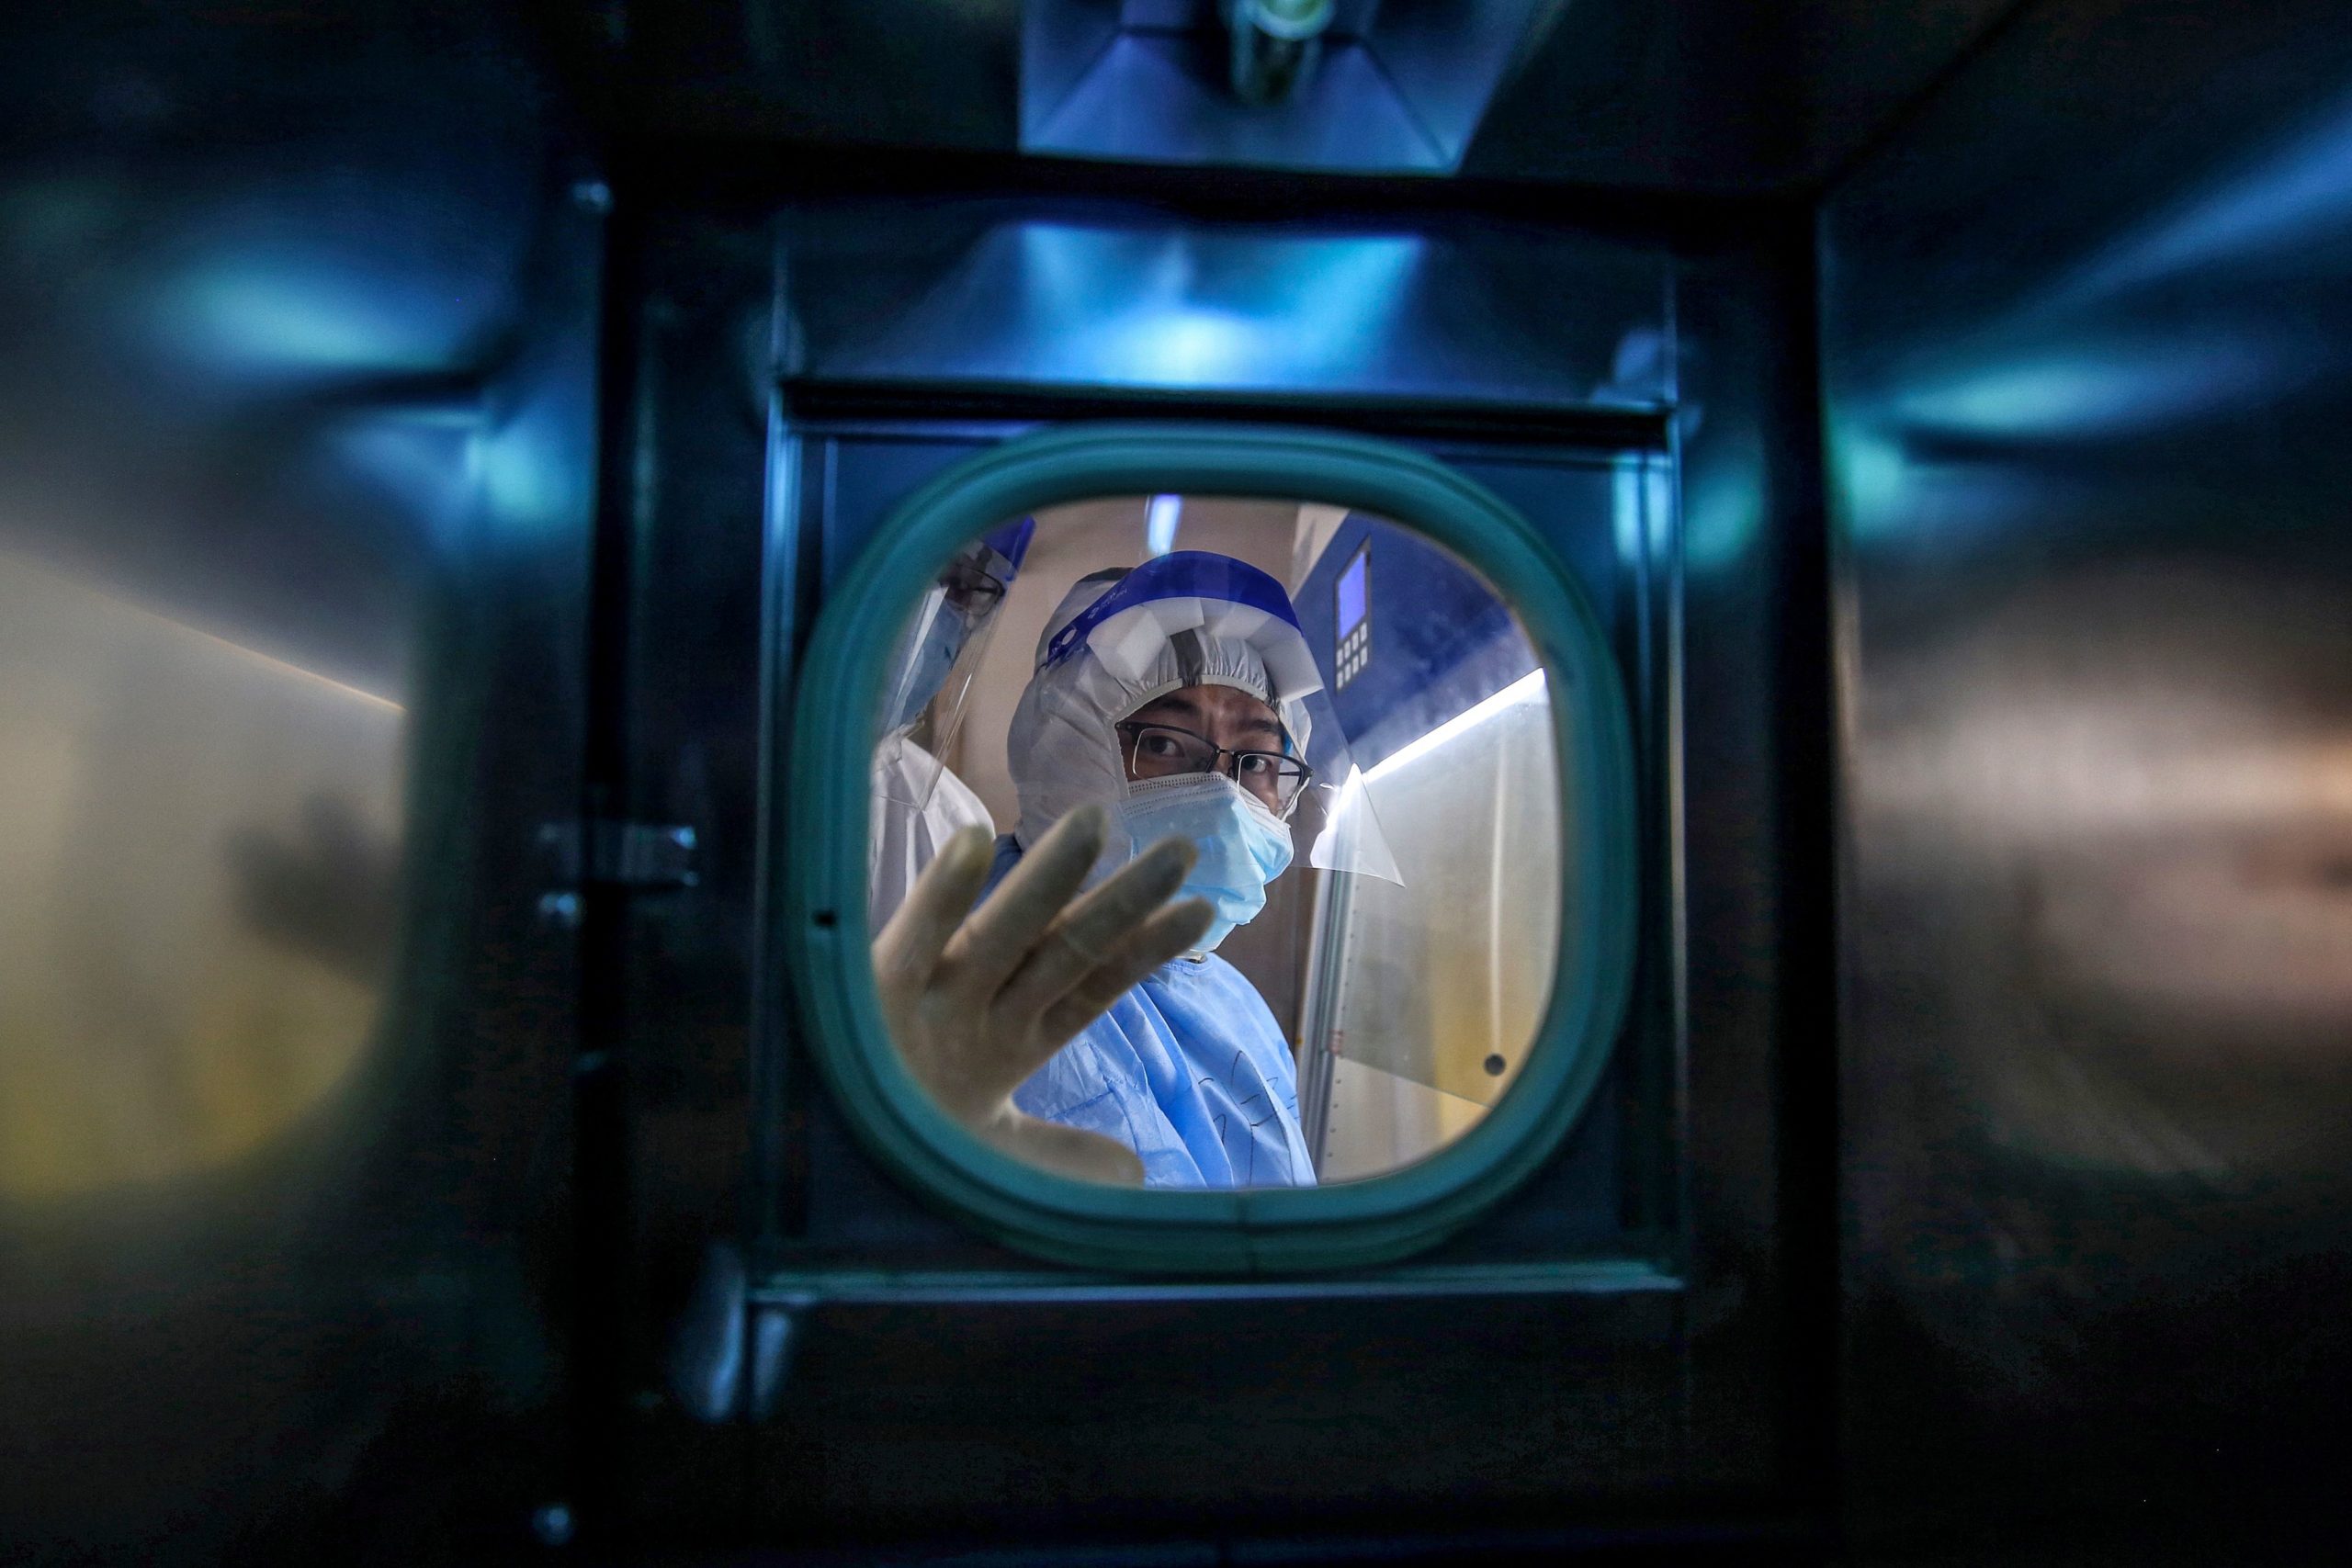 A medical staff member gestures inside an isolation ward at Red Cross Hospital in Wuhan, China on March 10, 2020. (STR/AFP via Getty Images)